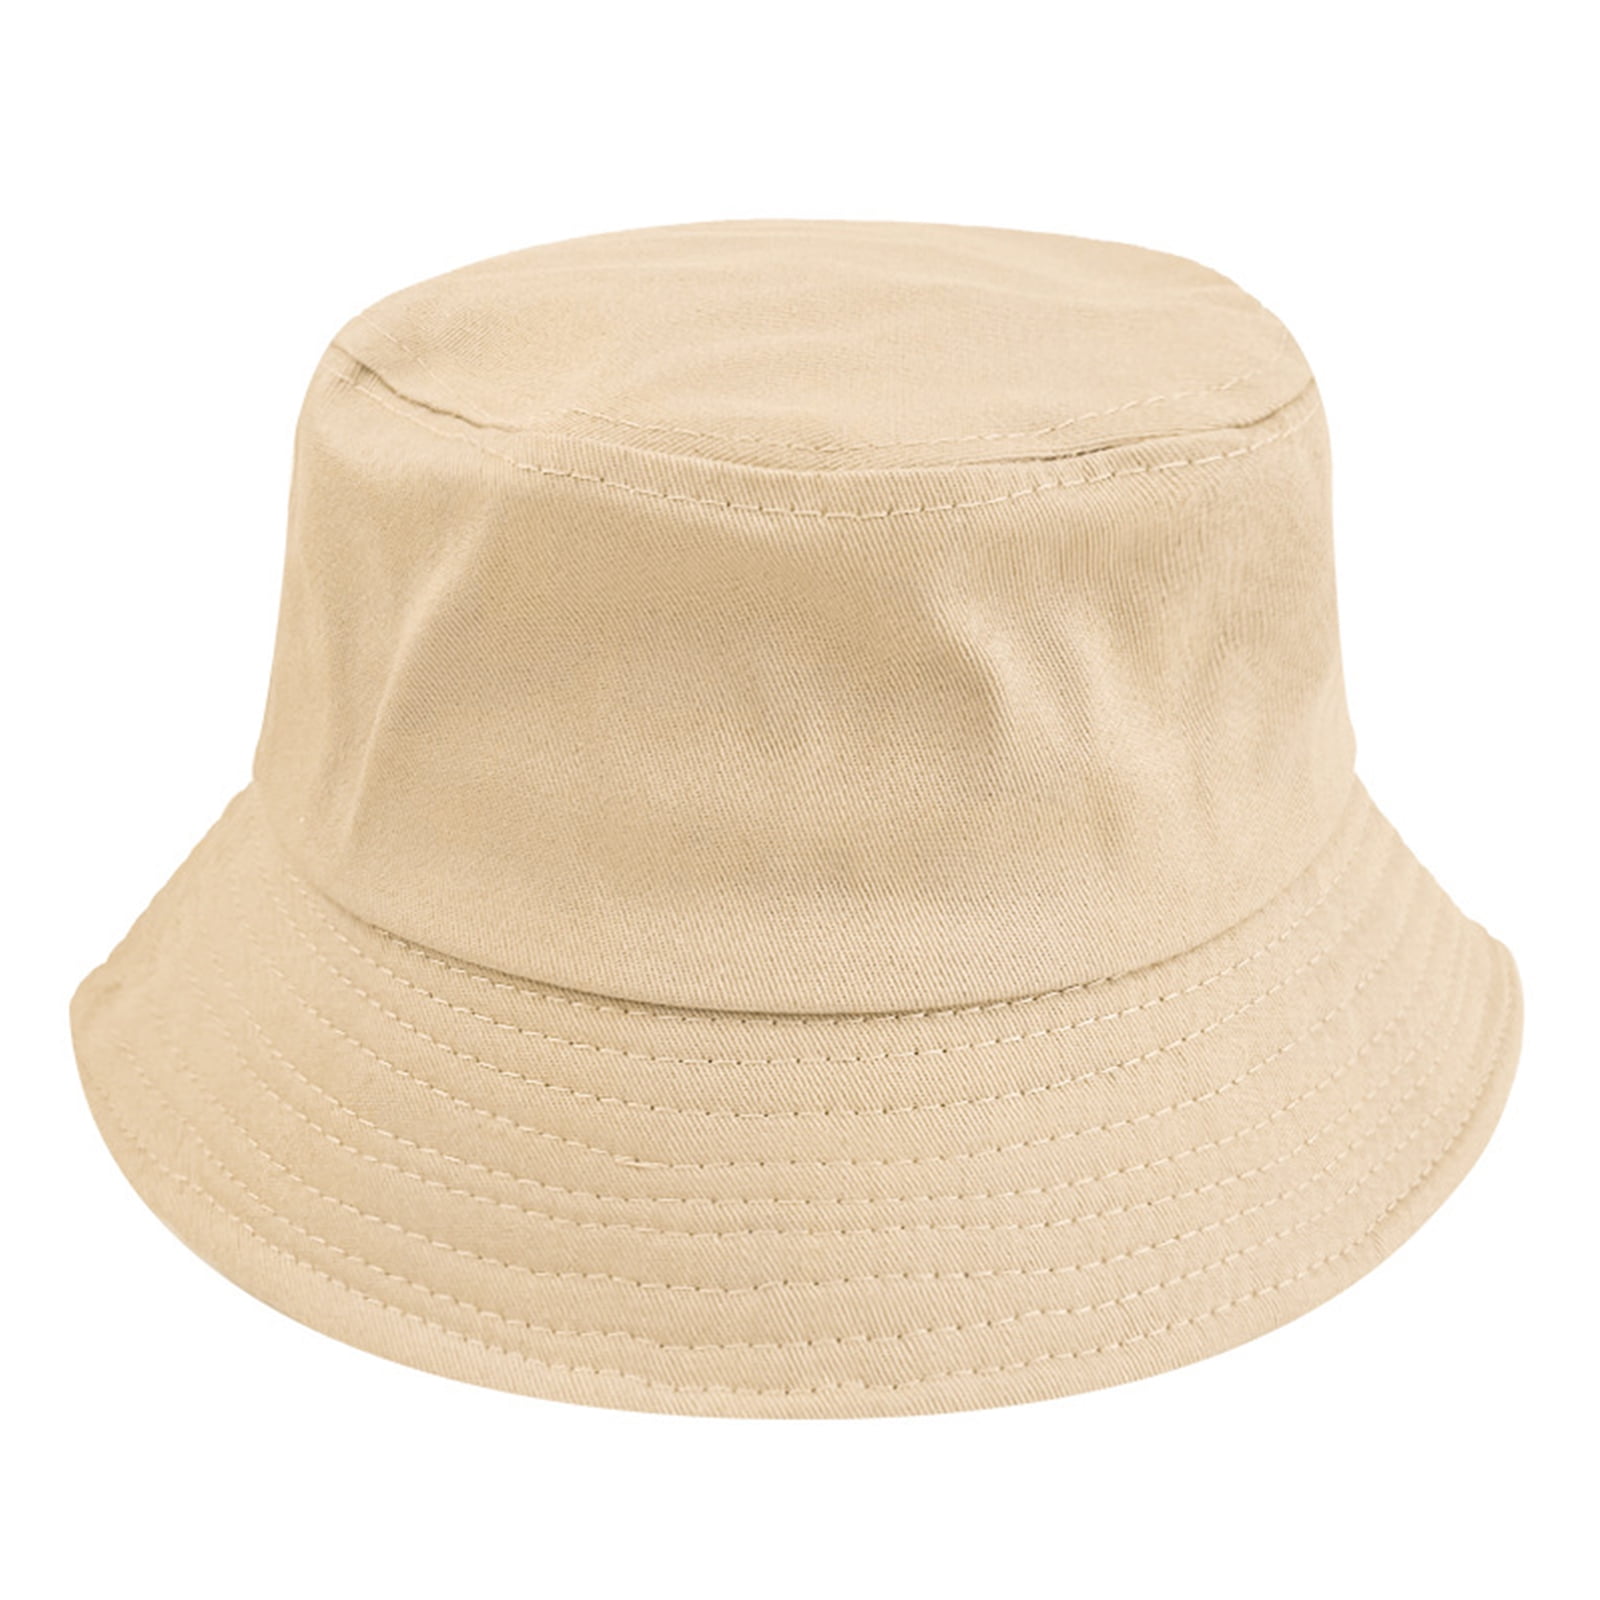 Bodychum Solid Color Bucket Hat for Women 100% Cotton Anti-UV Summer ...